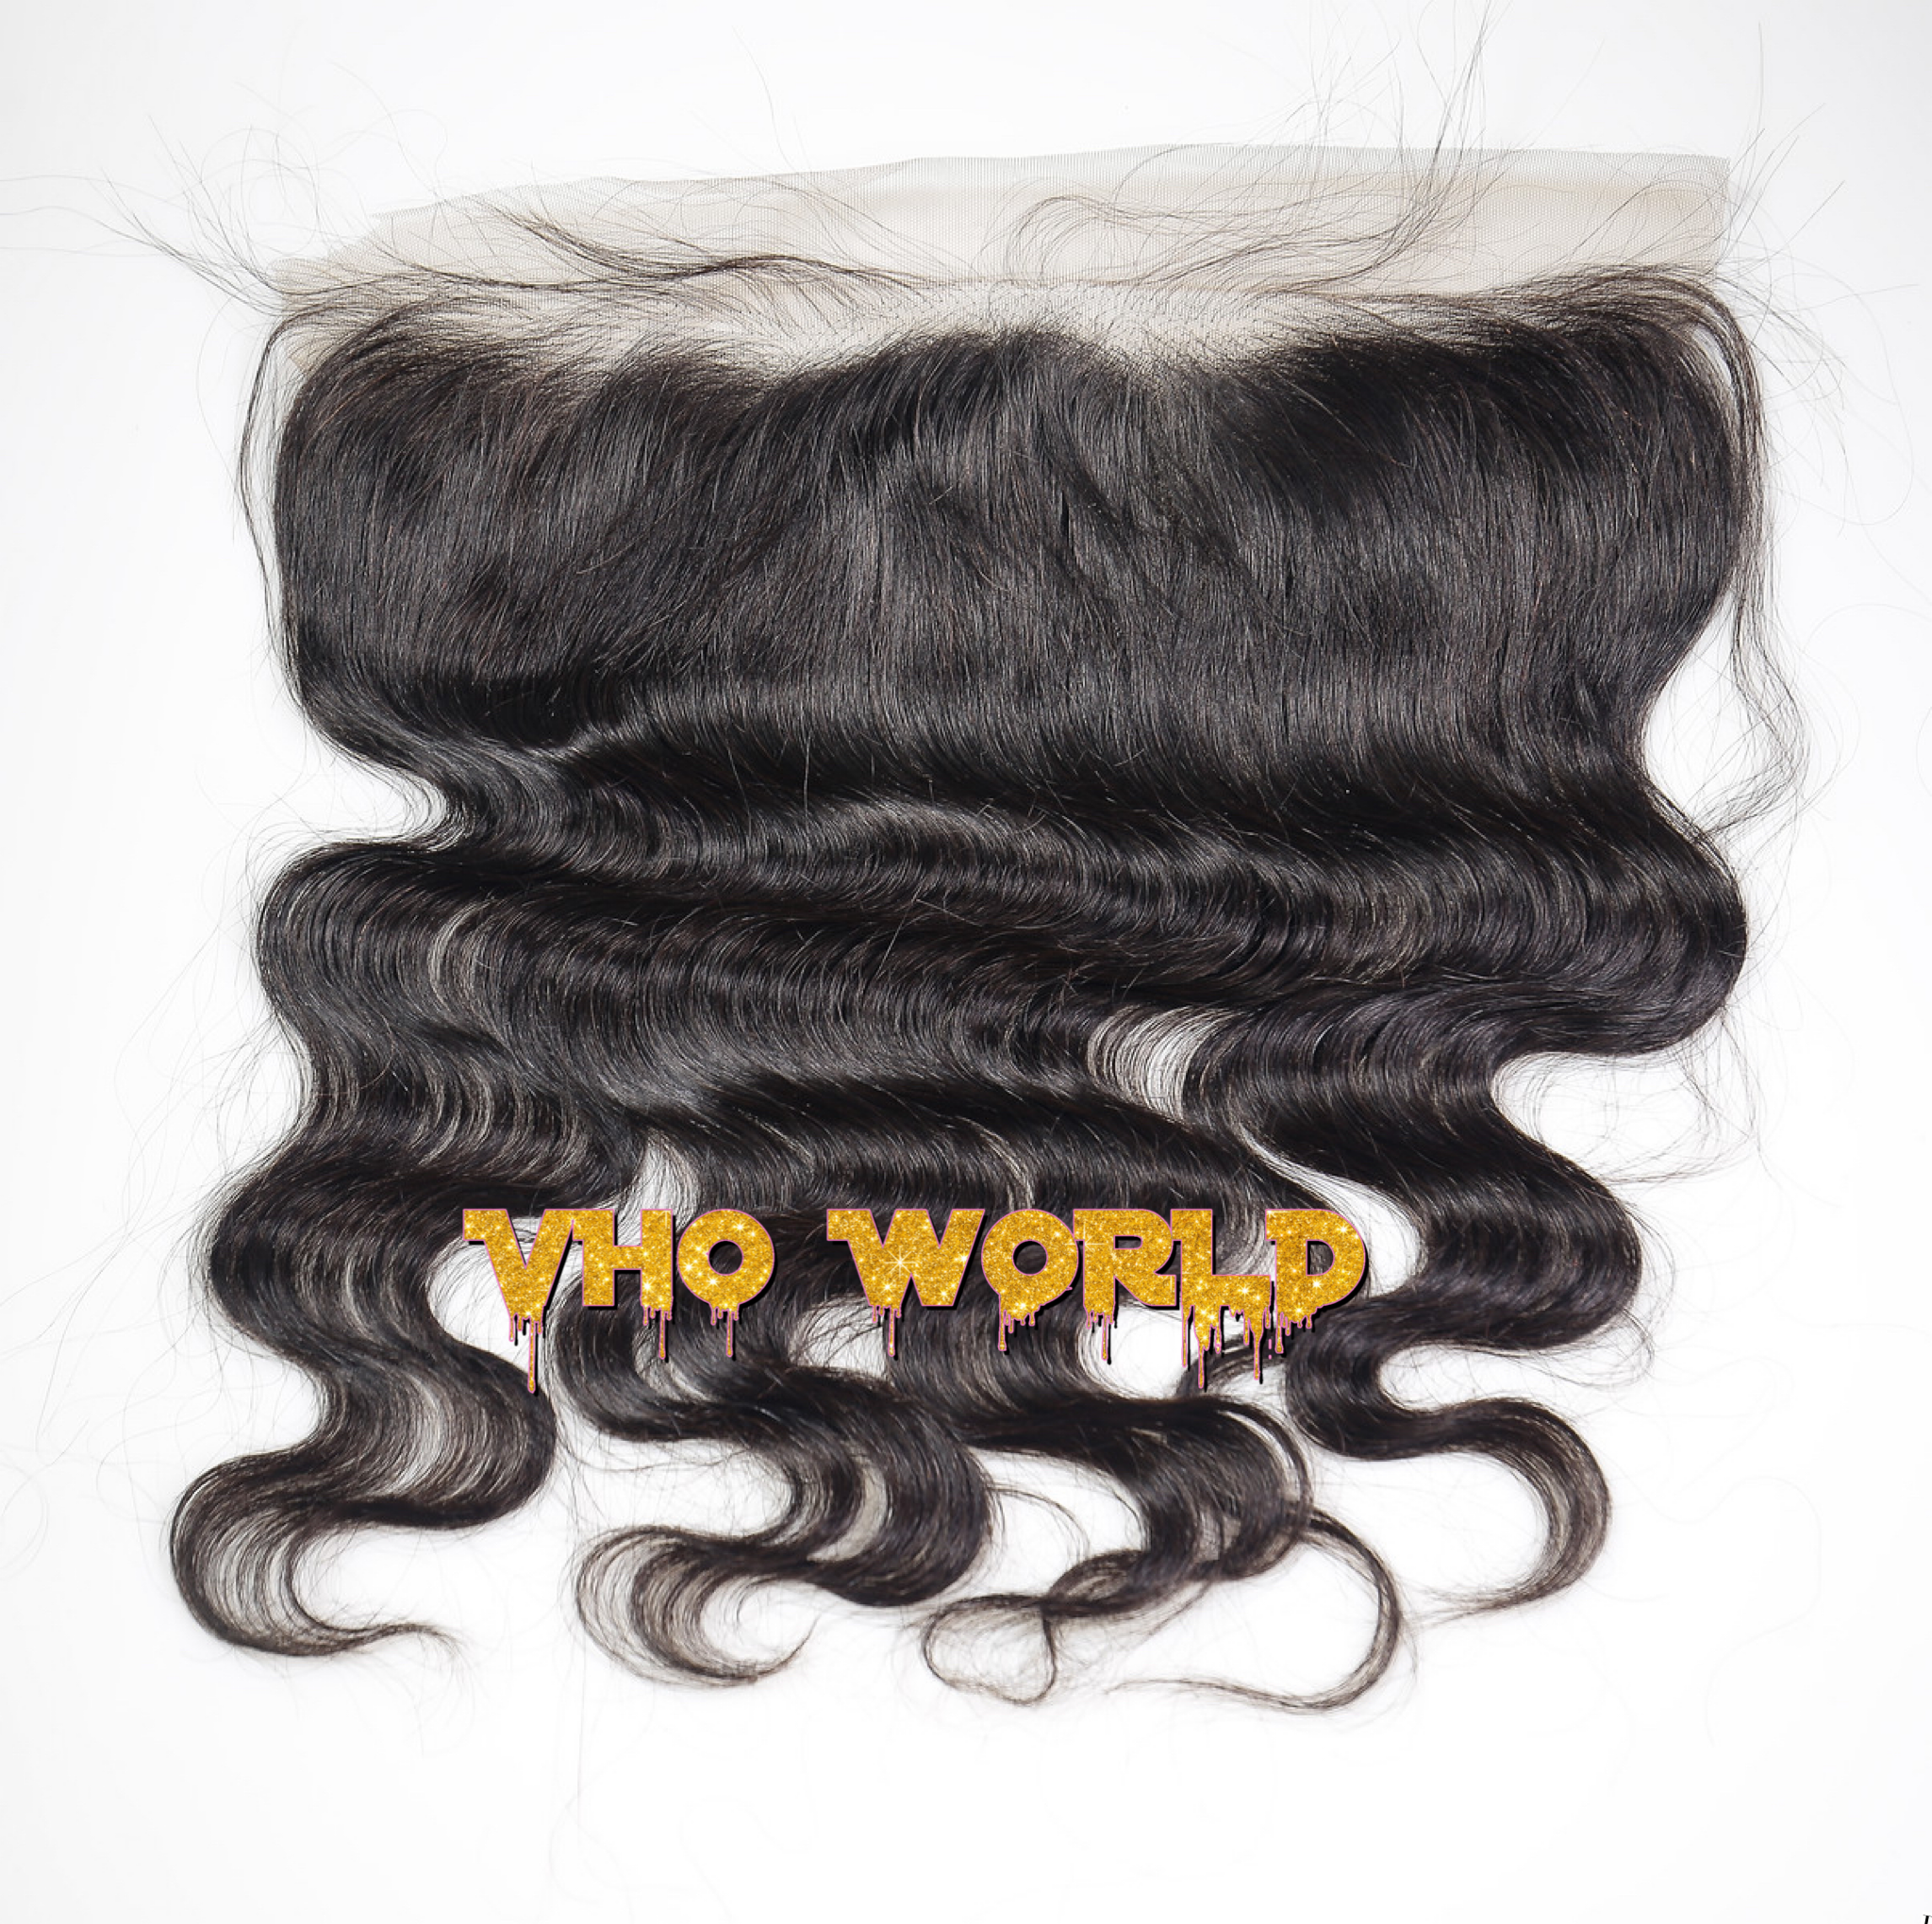 Frontals - VHO World